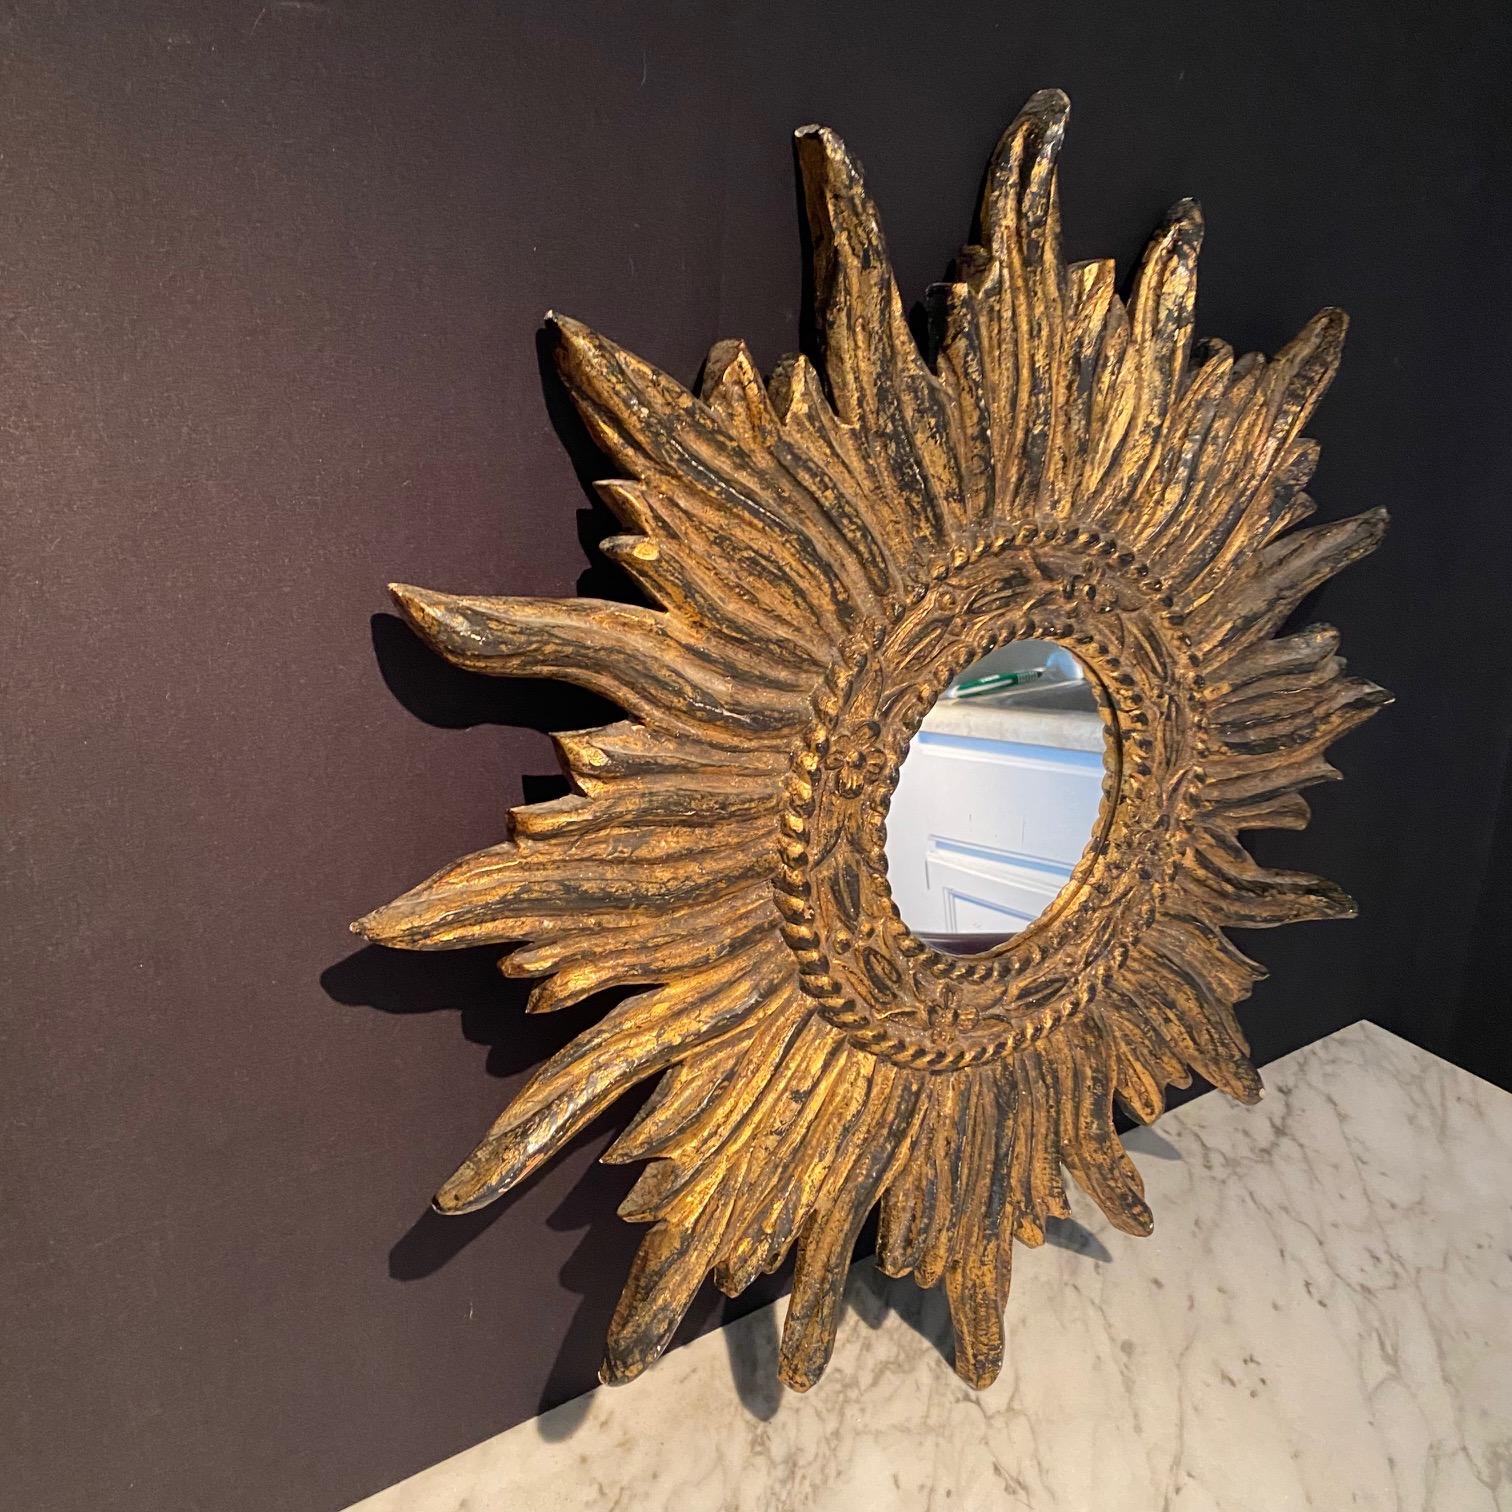  A very beautiful, intricate and decorative large golden soleil sunburst starburst giltwood convex mirror. Made and bought in France. Handmade of carved stunningly gilt-gold plated wood, in great condition. One of our favorites.   Mirror is 6.5